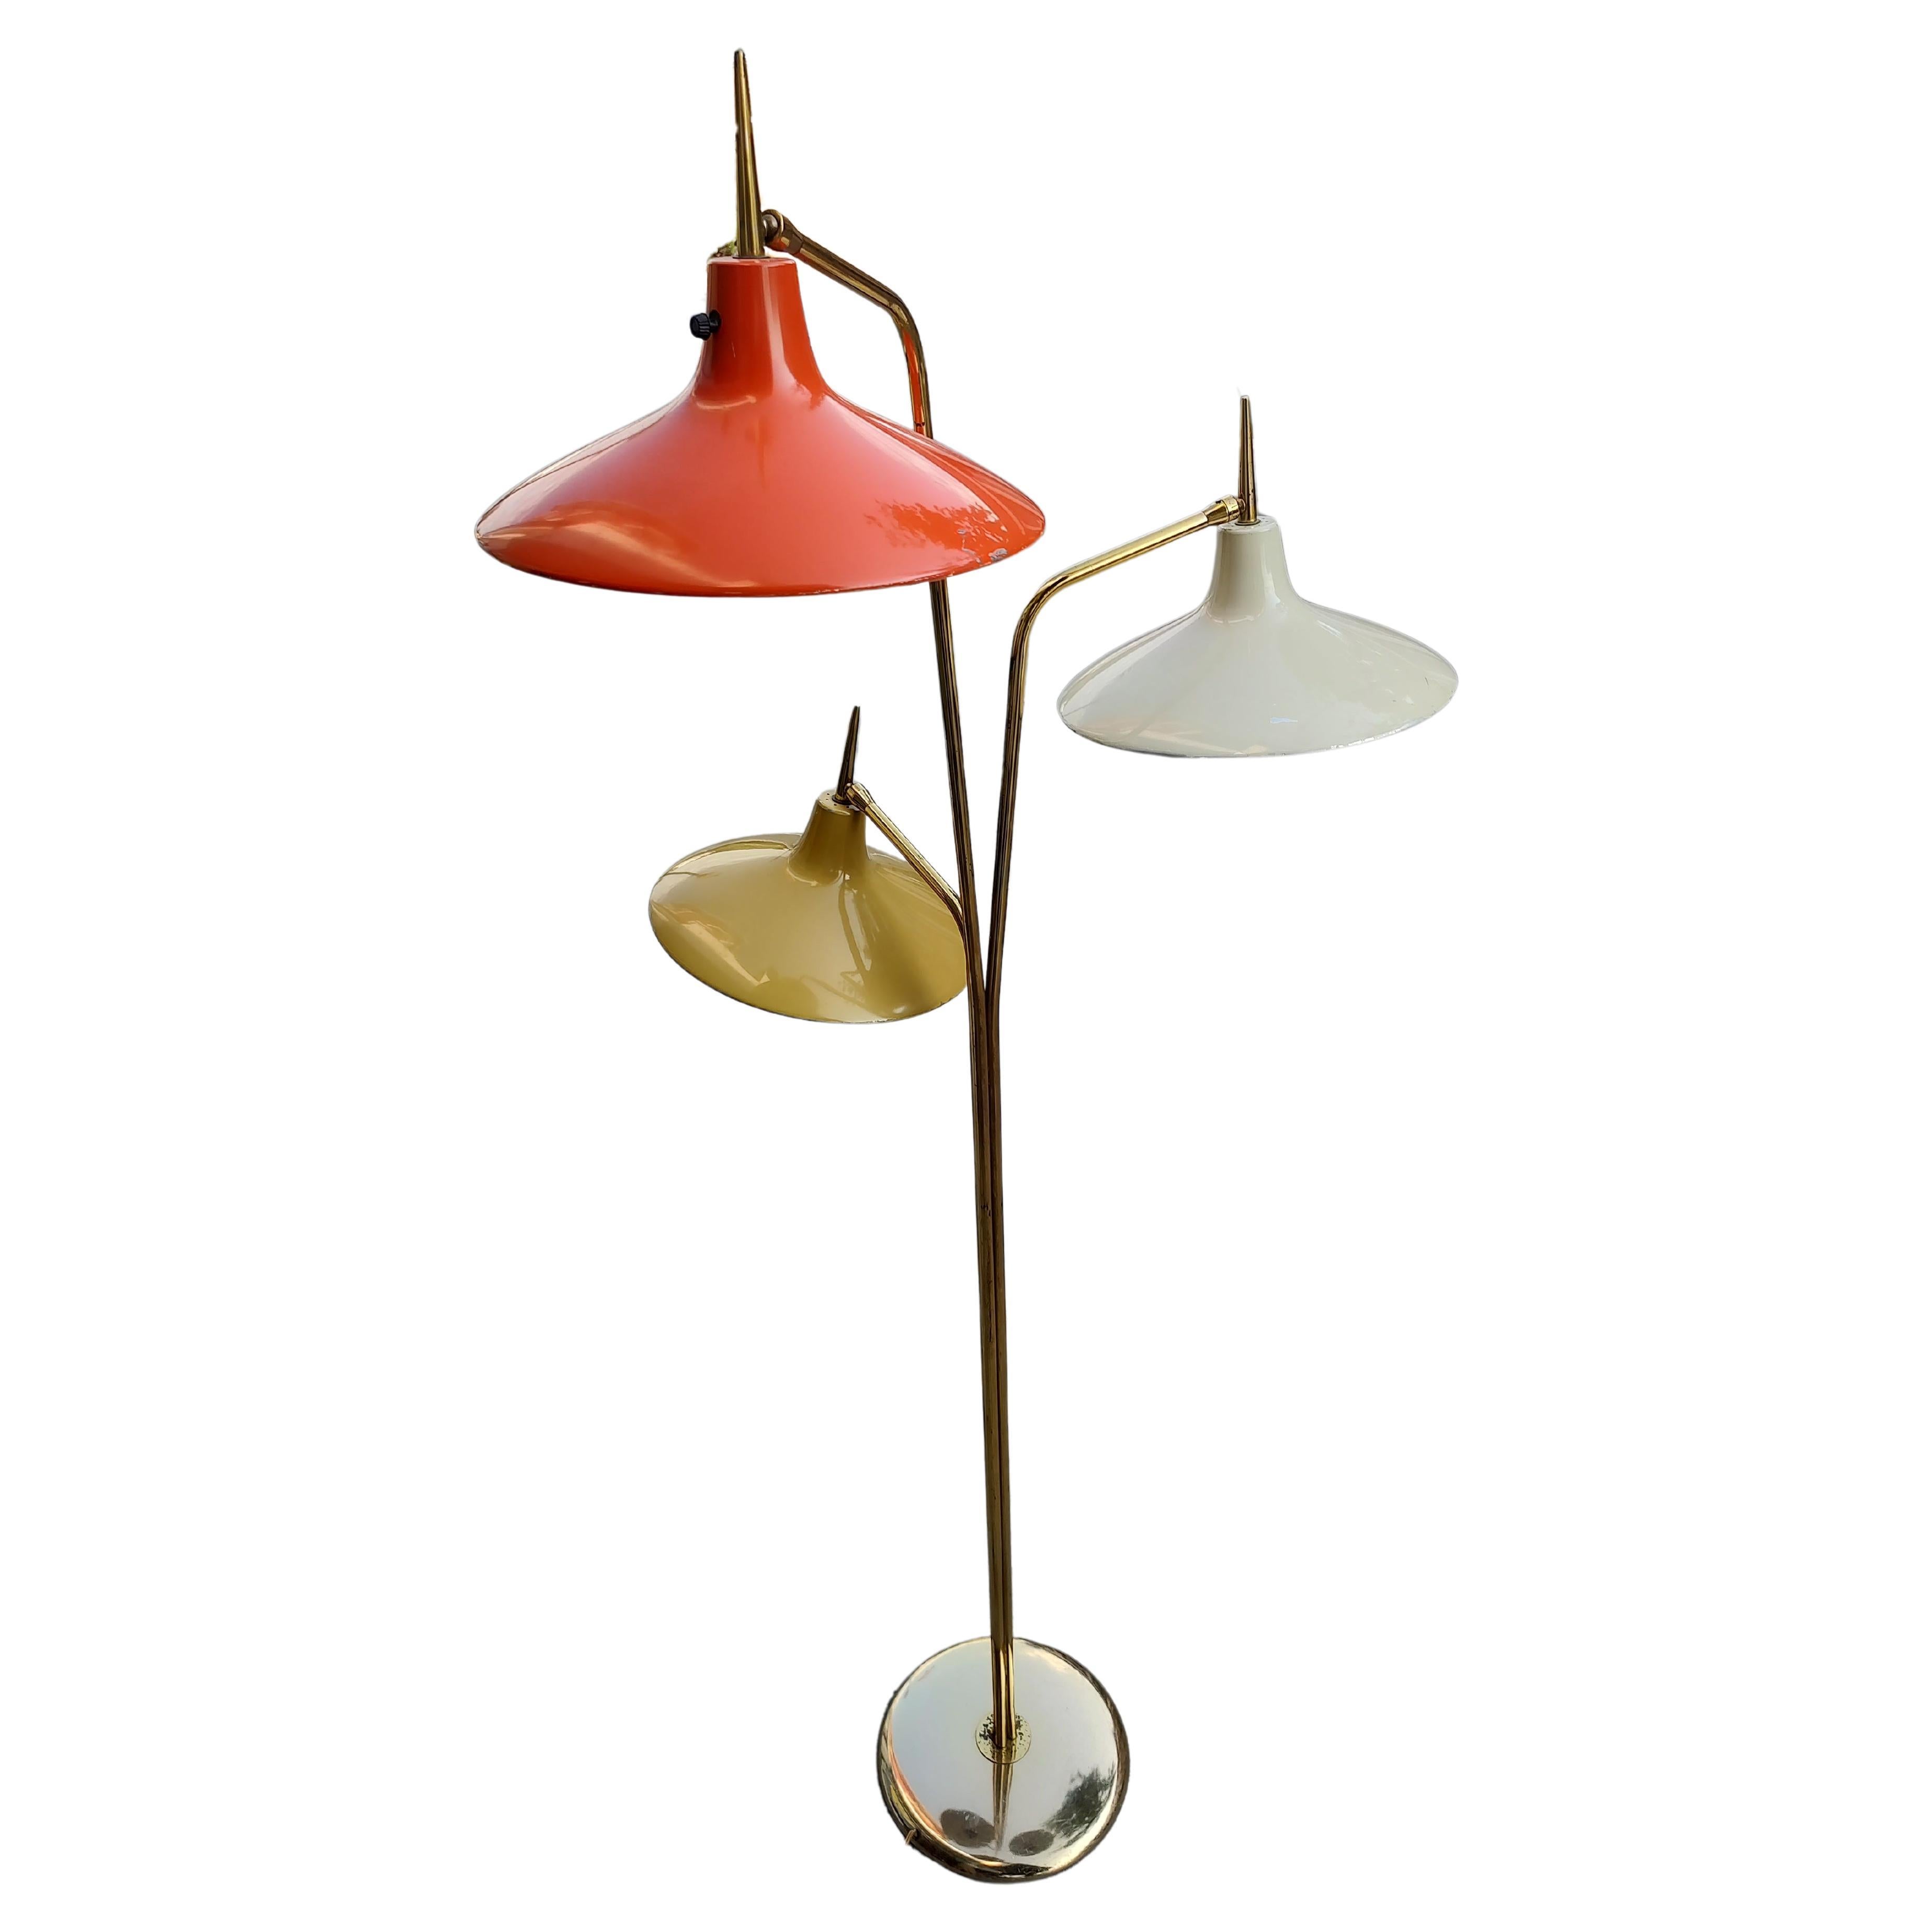 Mid Century Modern Sculptural Italian Triennial Floor Lamp Enameled Shades In Good Condition For Sale In Port Jervis, NY